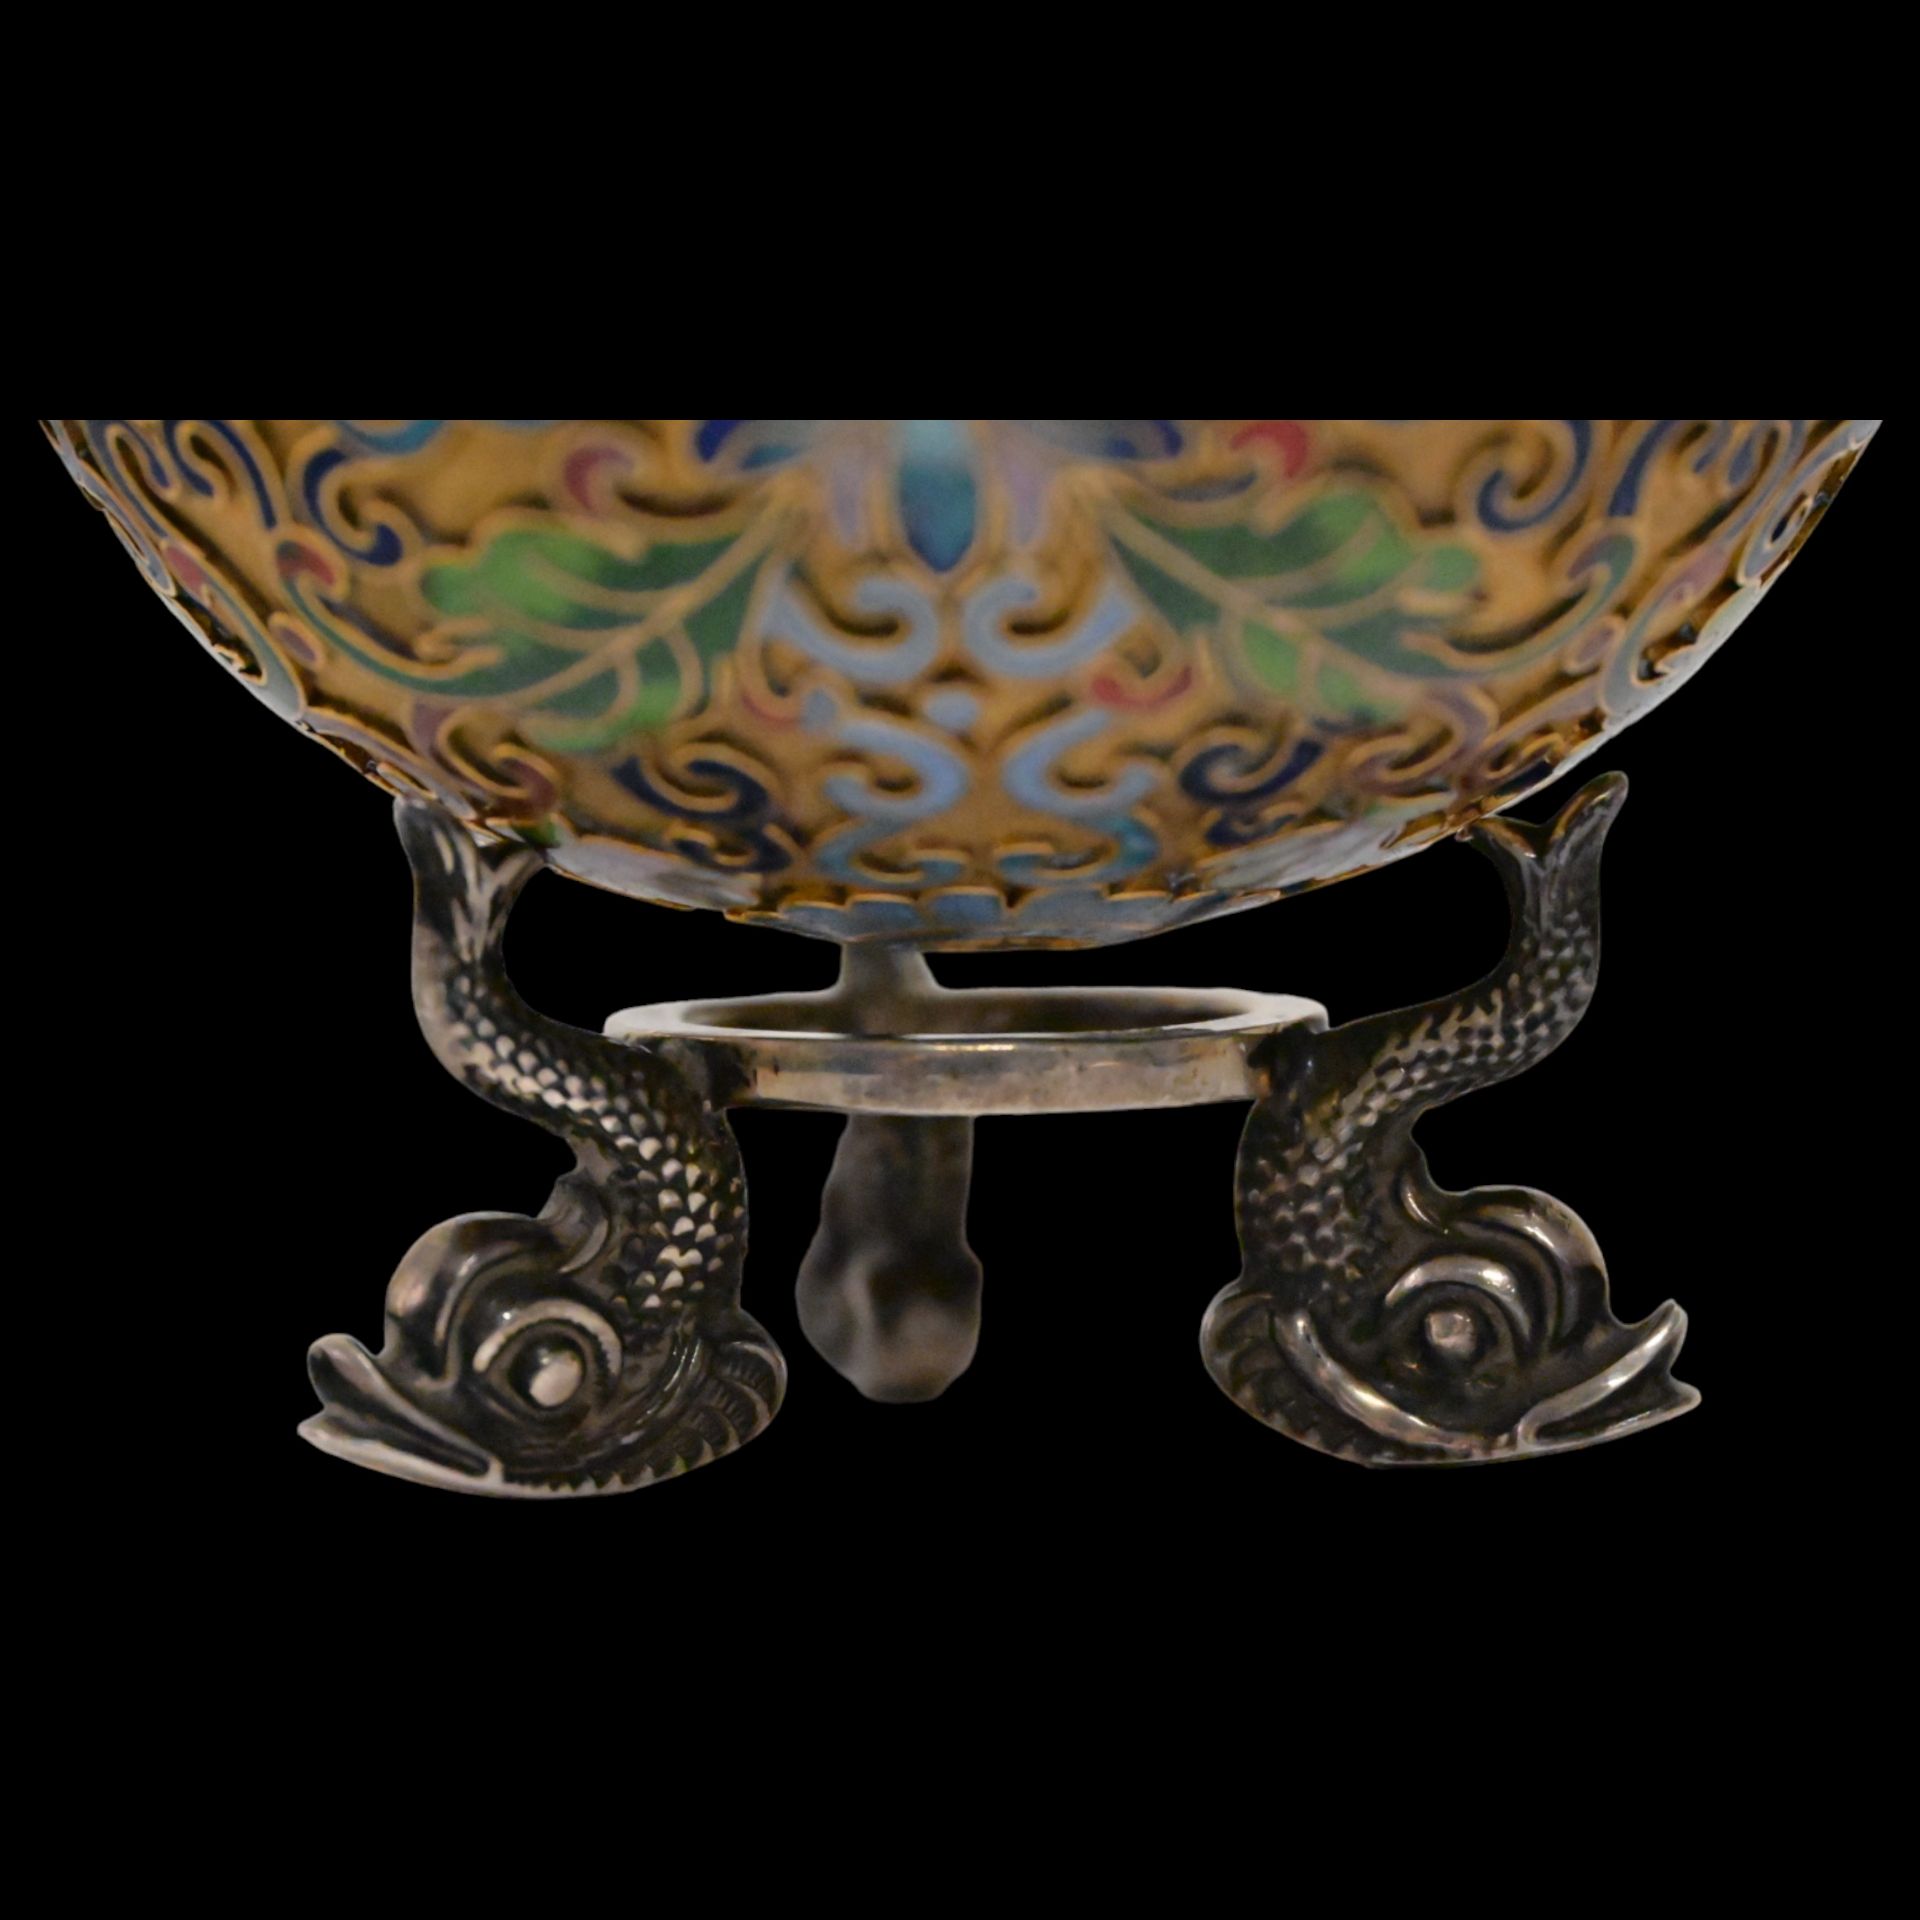 Russian gilded and enamel Easter egg on a silver stand, Russian, 20th century. - Image 4 of 11